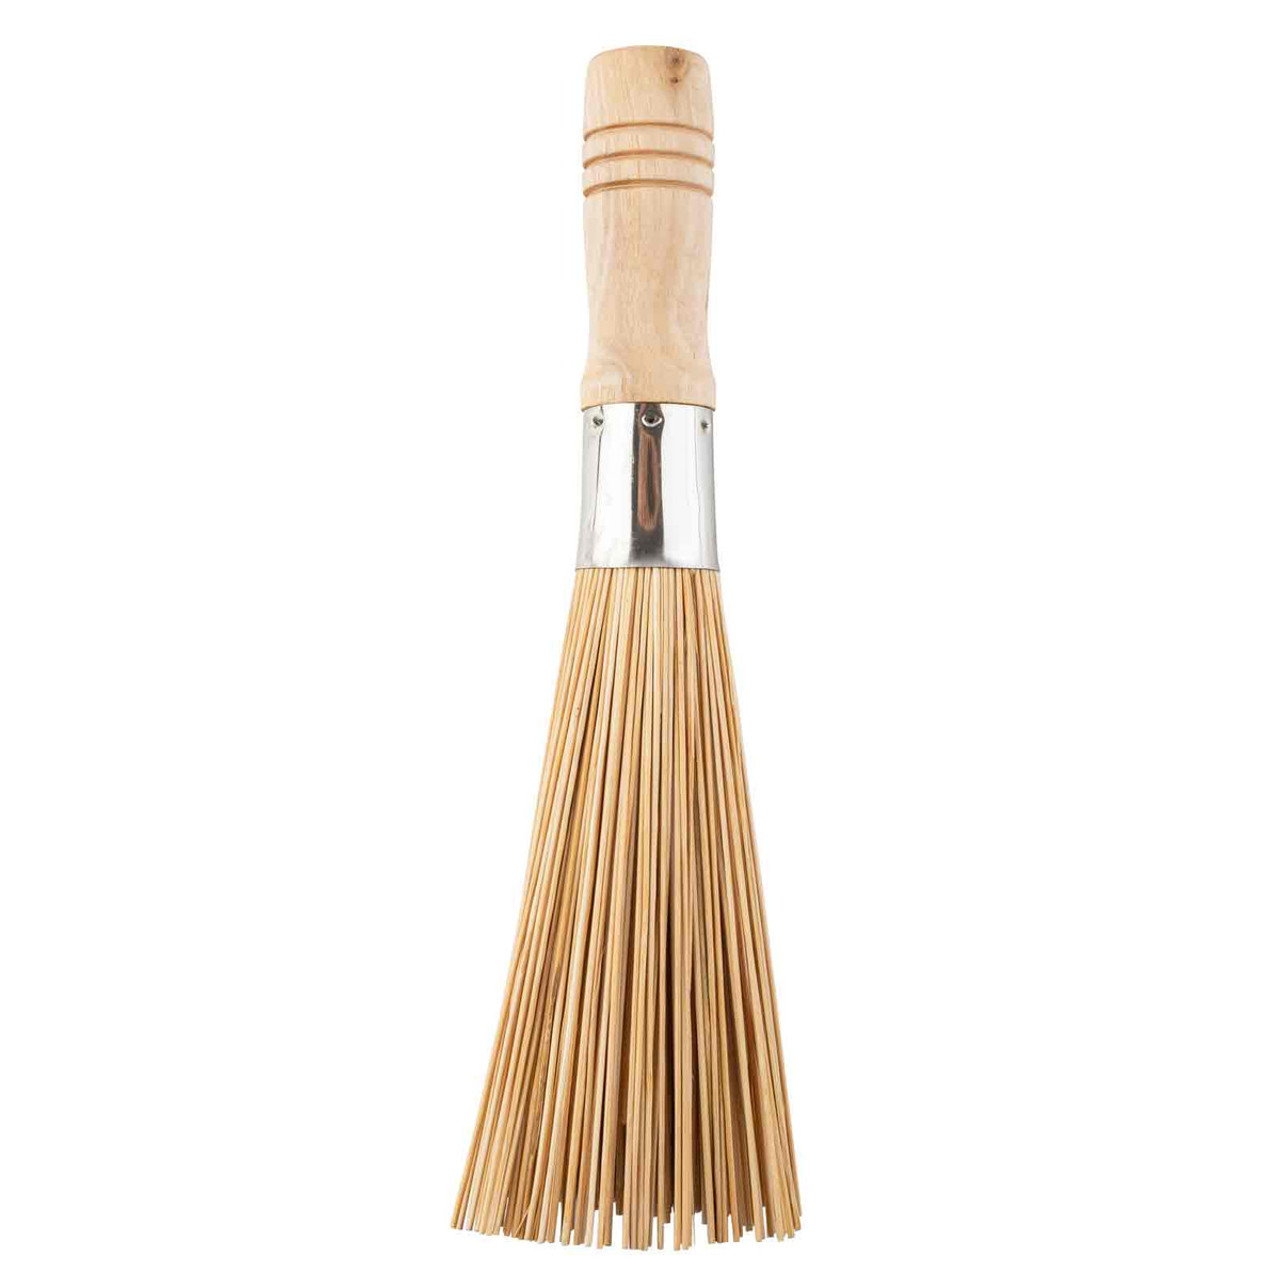 Bamboo Wok Brush,Cleaning Whisk Pot Brush Cleaning Brush Bamboo Kitchen Cleaning  Tools for Home Kitchens,Restaurants,Cleaning Tools